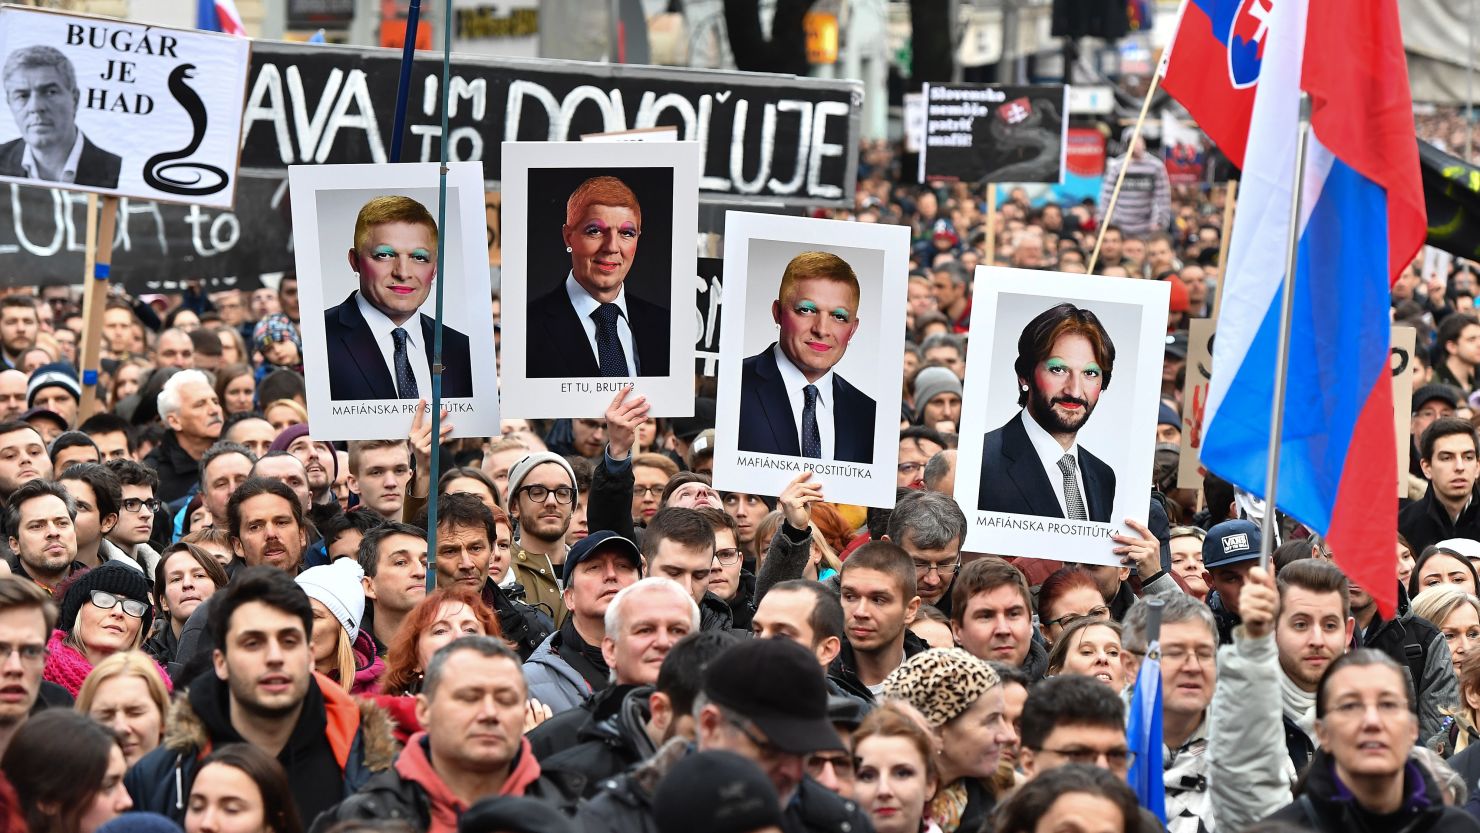 Protesters hold placards showing altered portraits of Slovakia government figures on Friday.